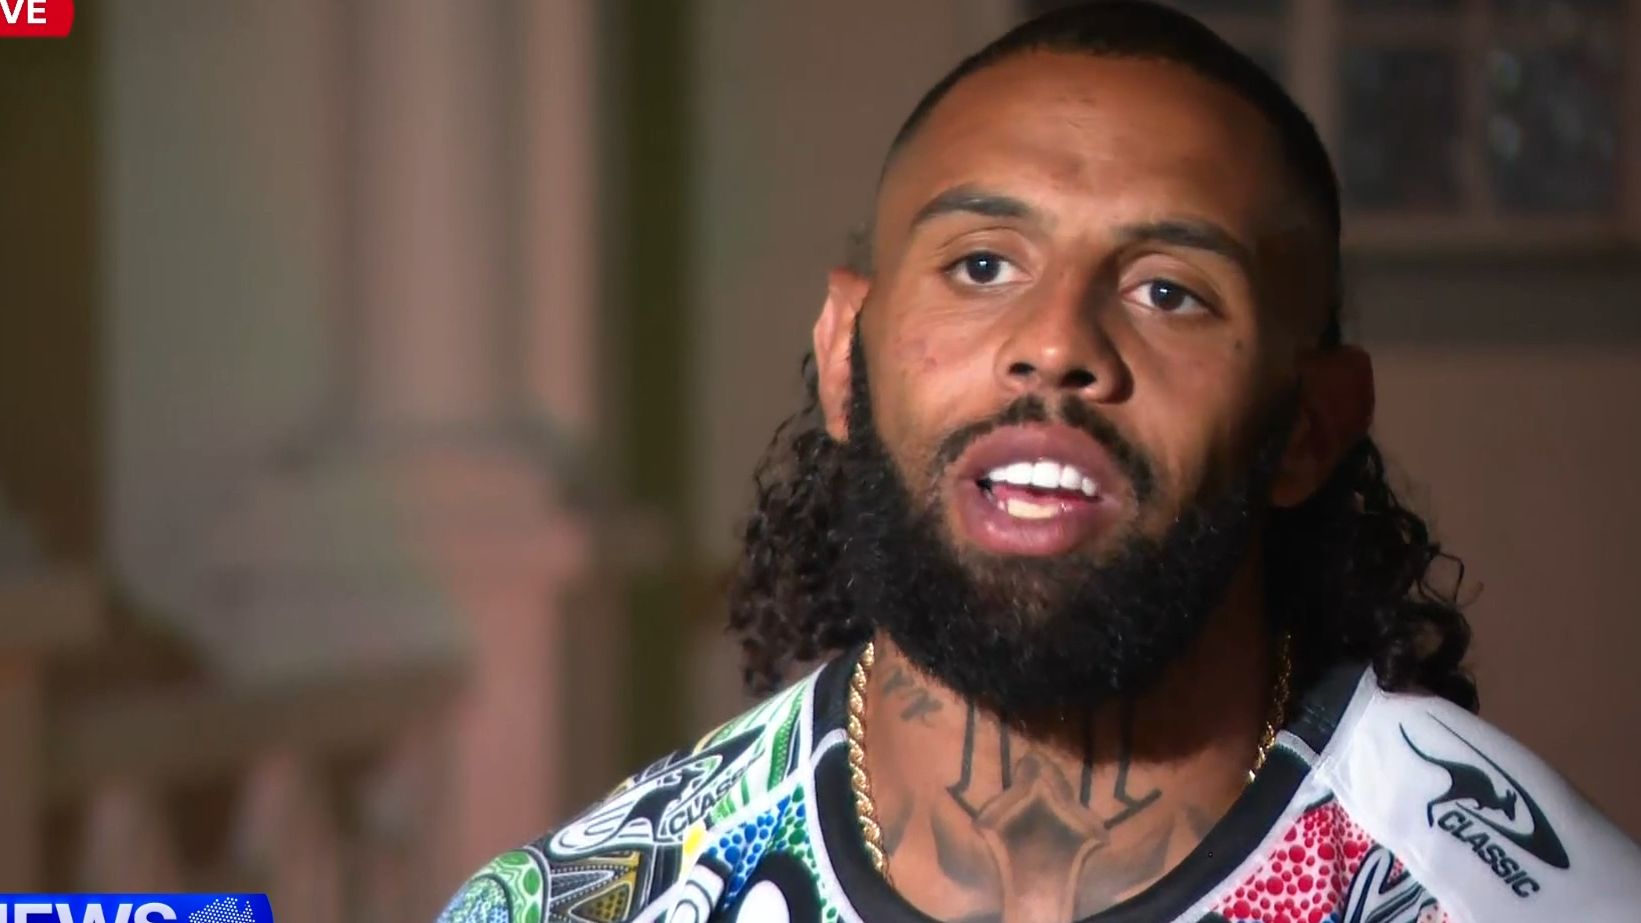 'I needed a change': Why Koori Knockout scandal was 'blessing in disguise' for Josh Addo-Carr